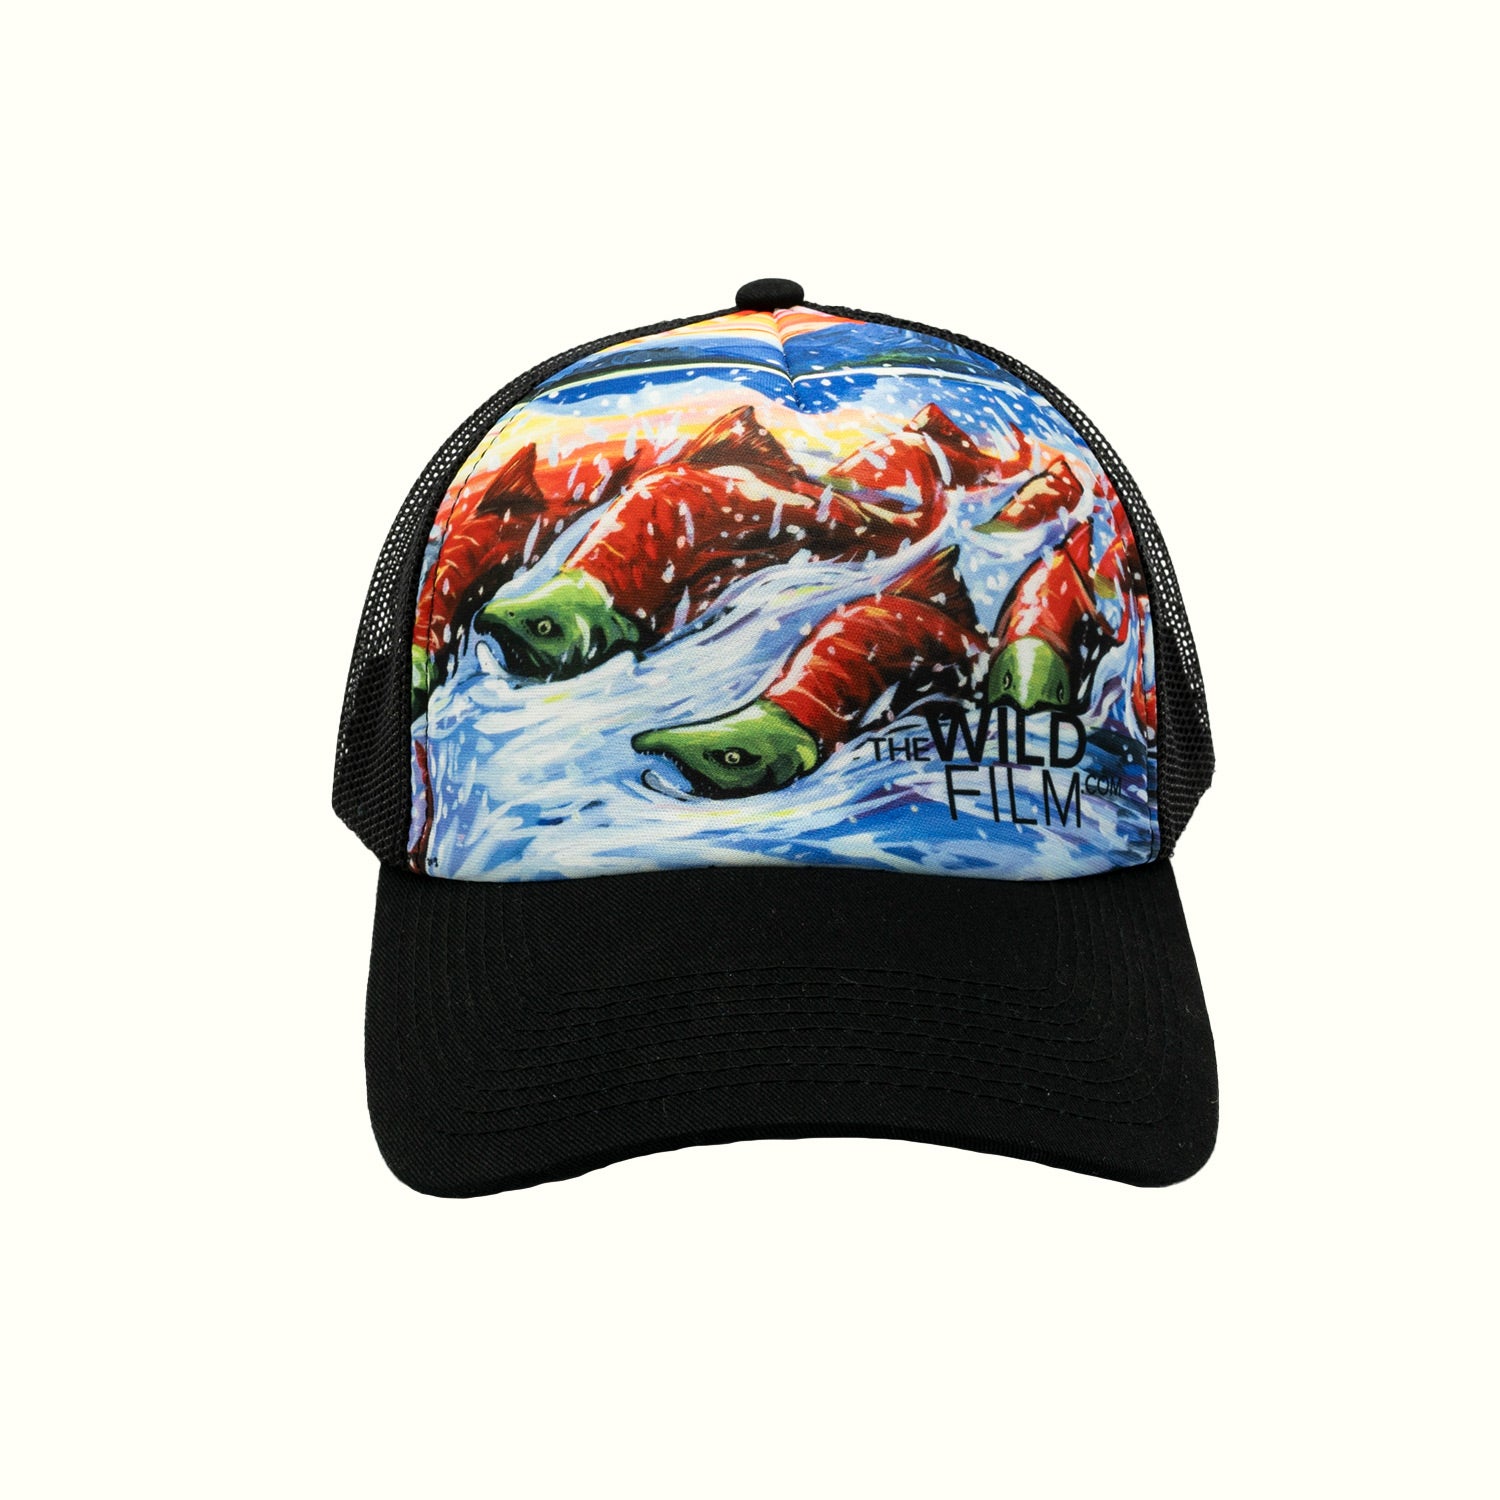 The Wild movie special edition hat